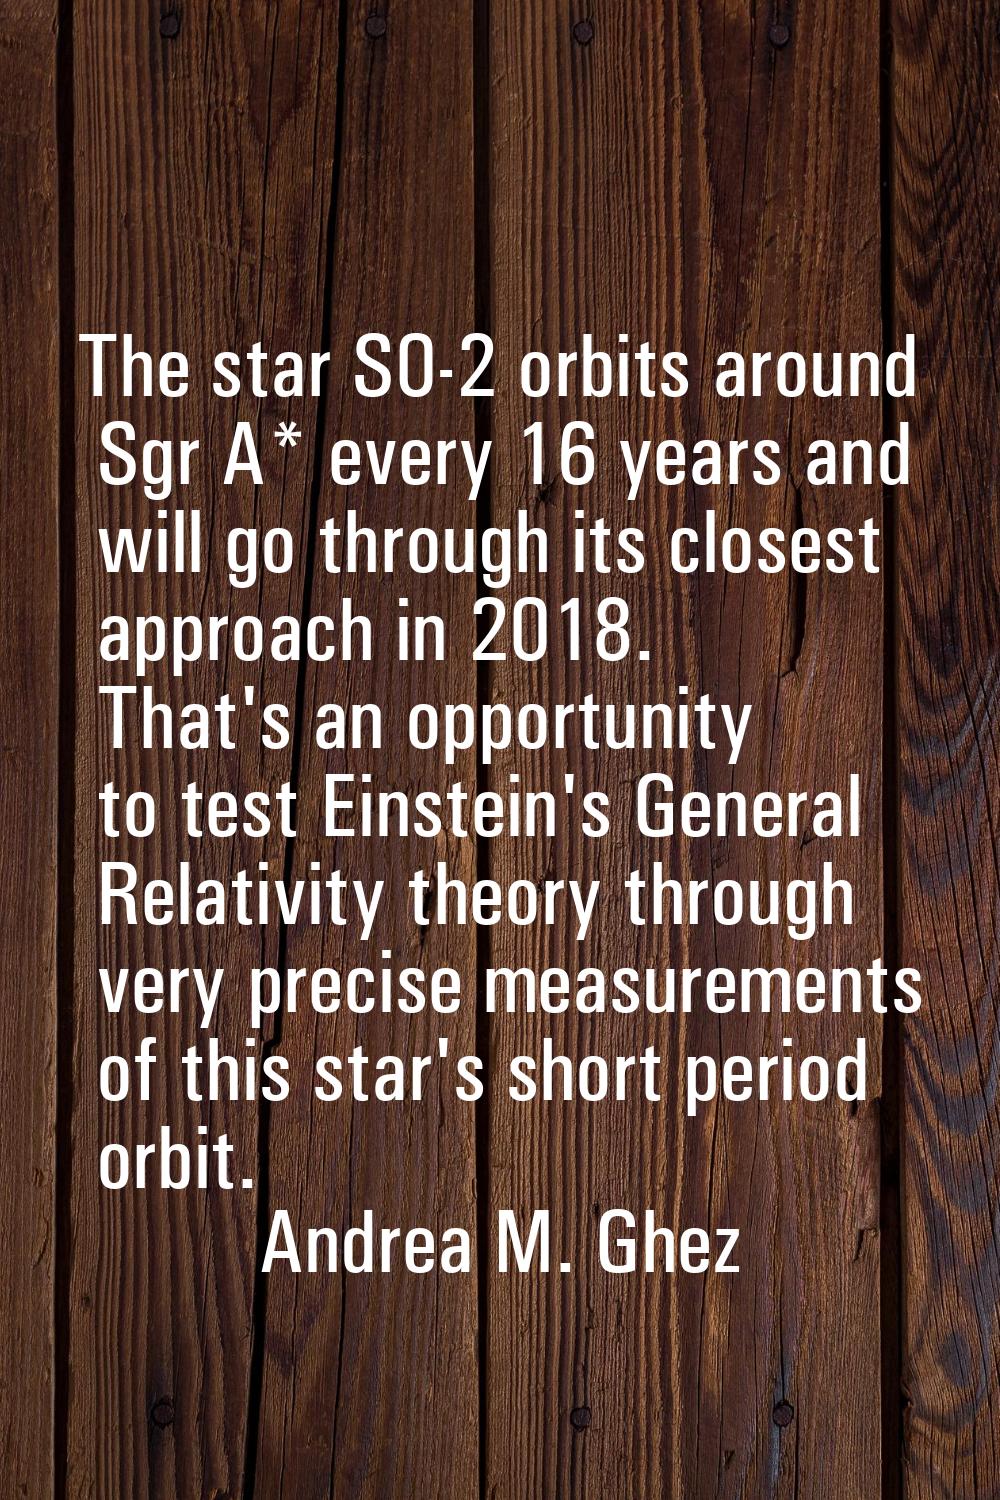 The star S0-2 orbits around Sgr A* every 16 years and will go through its closest approach in 2018.